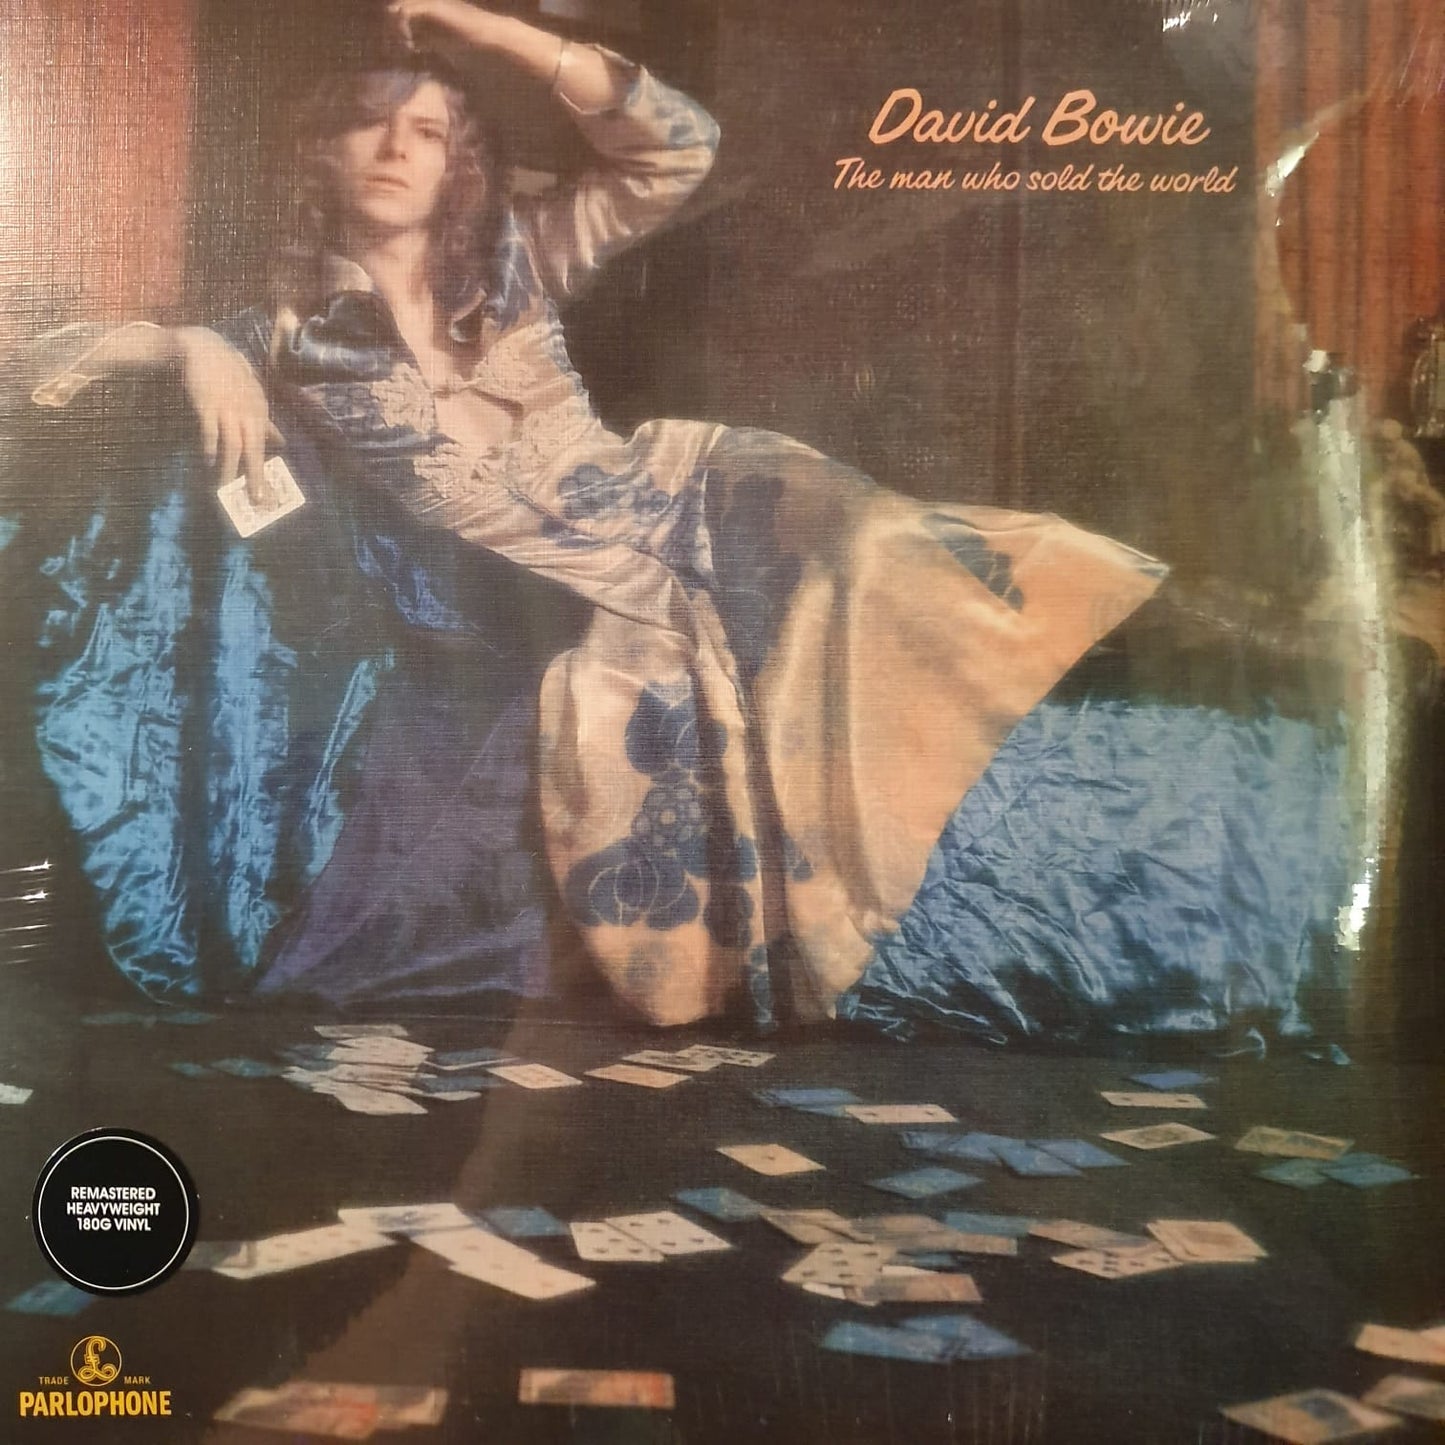 NEW - David Bowie, THE MAN WHO SOLD THE WORLD 2015 Version